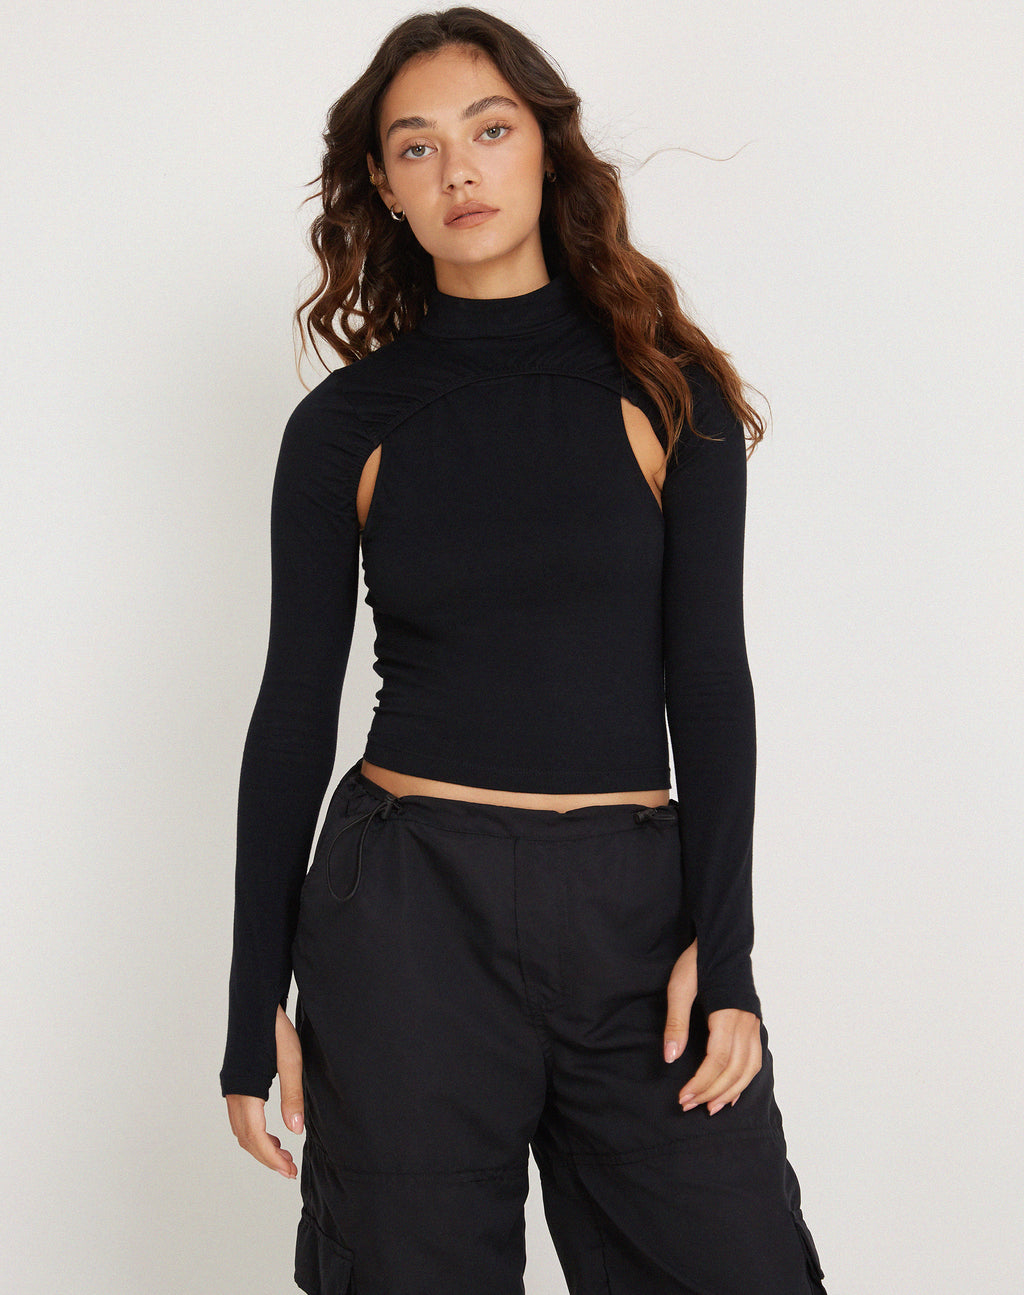 Bandi Long Sleeve High Neck Cut Out Top in Black